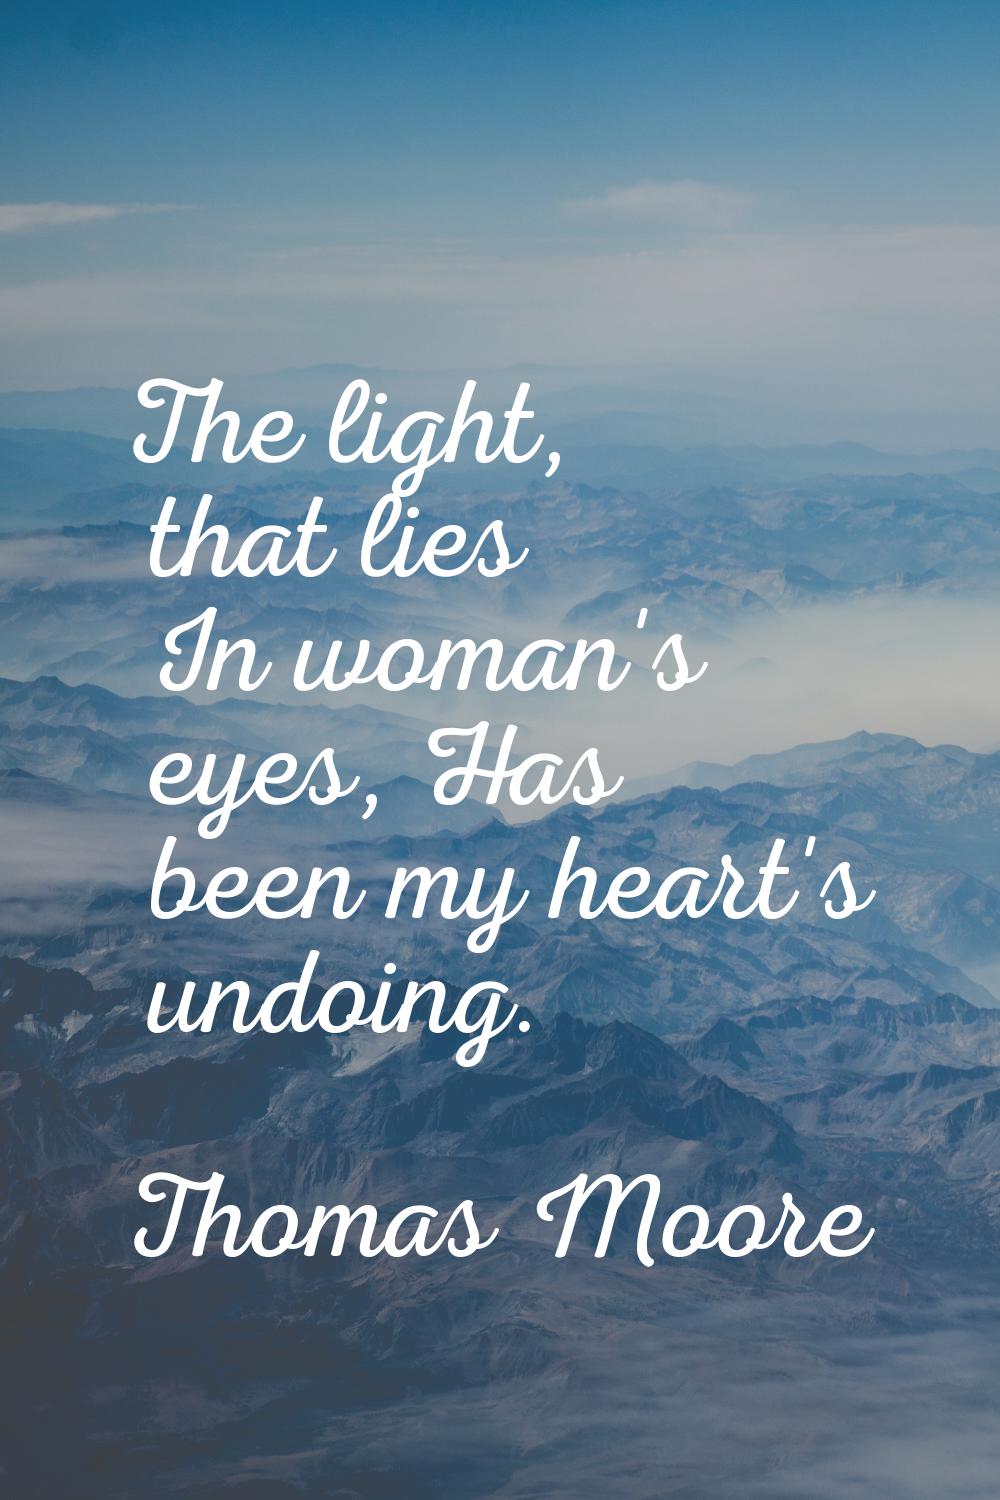 The light, that lies In woman's eyes, Has been my heart's undoing.